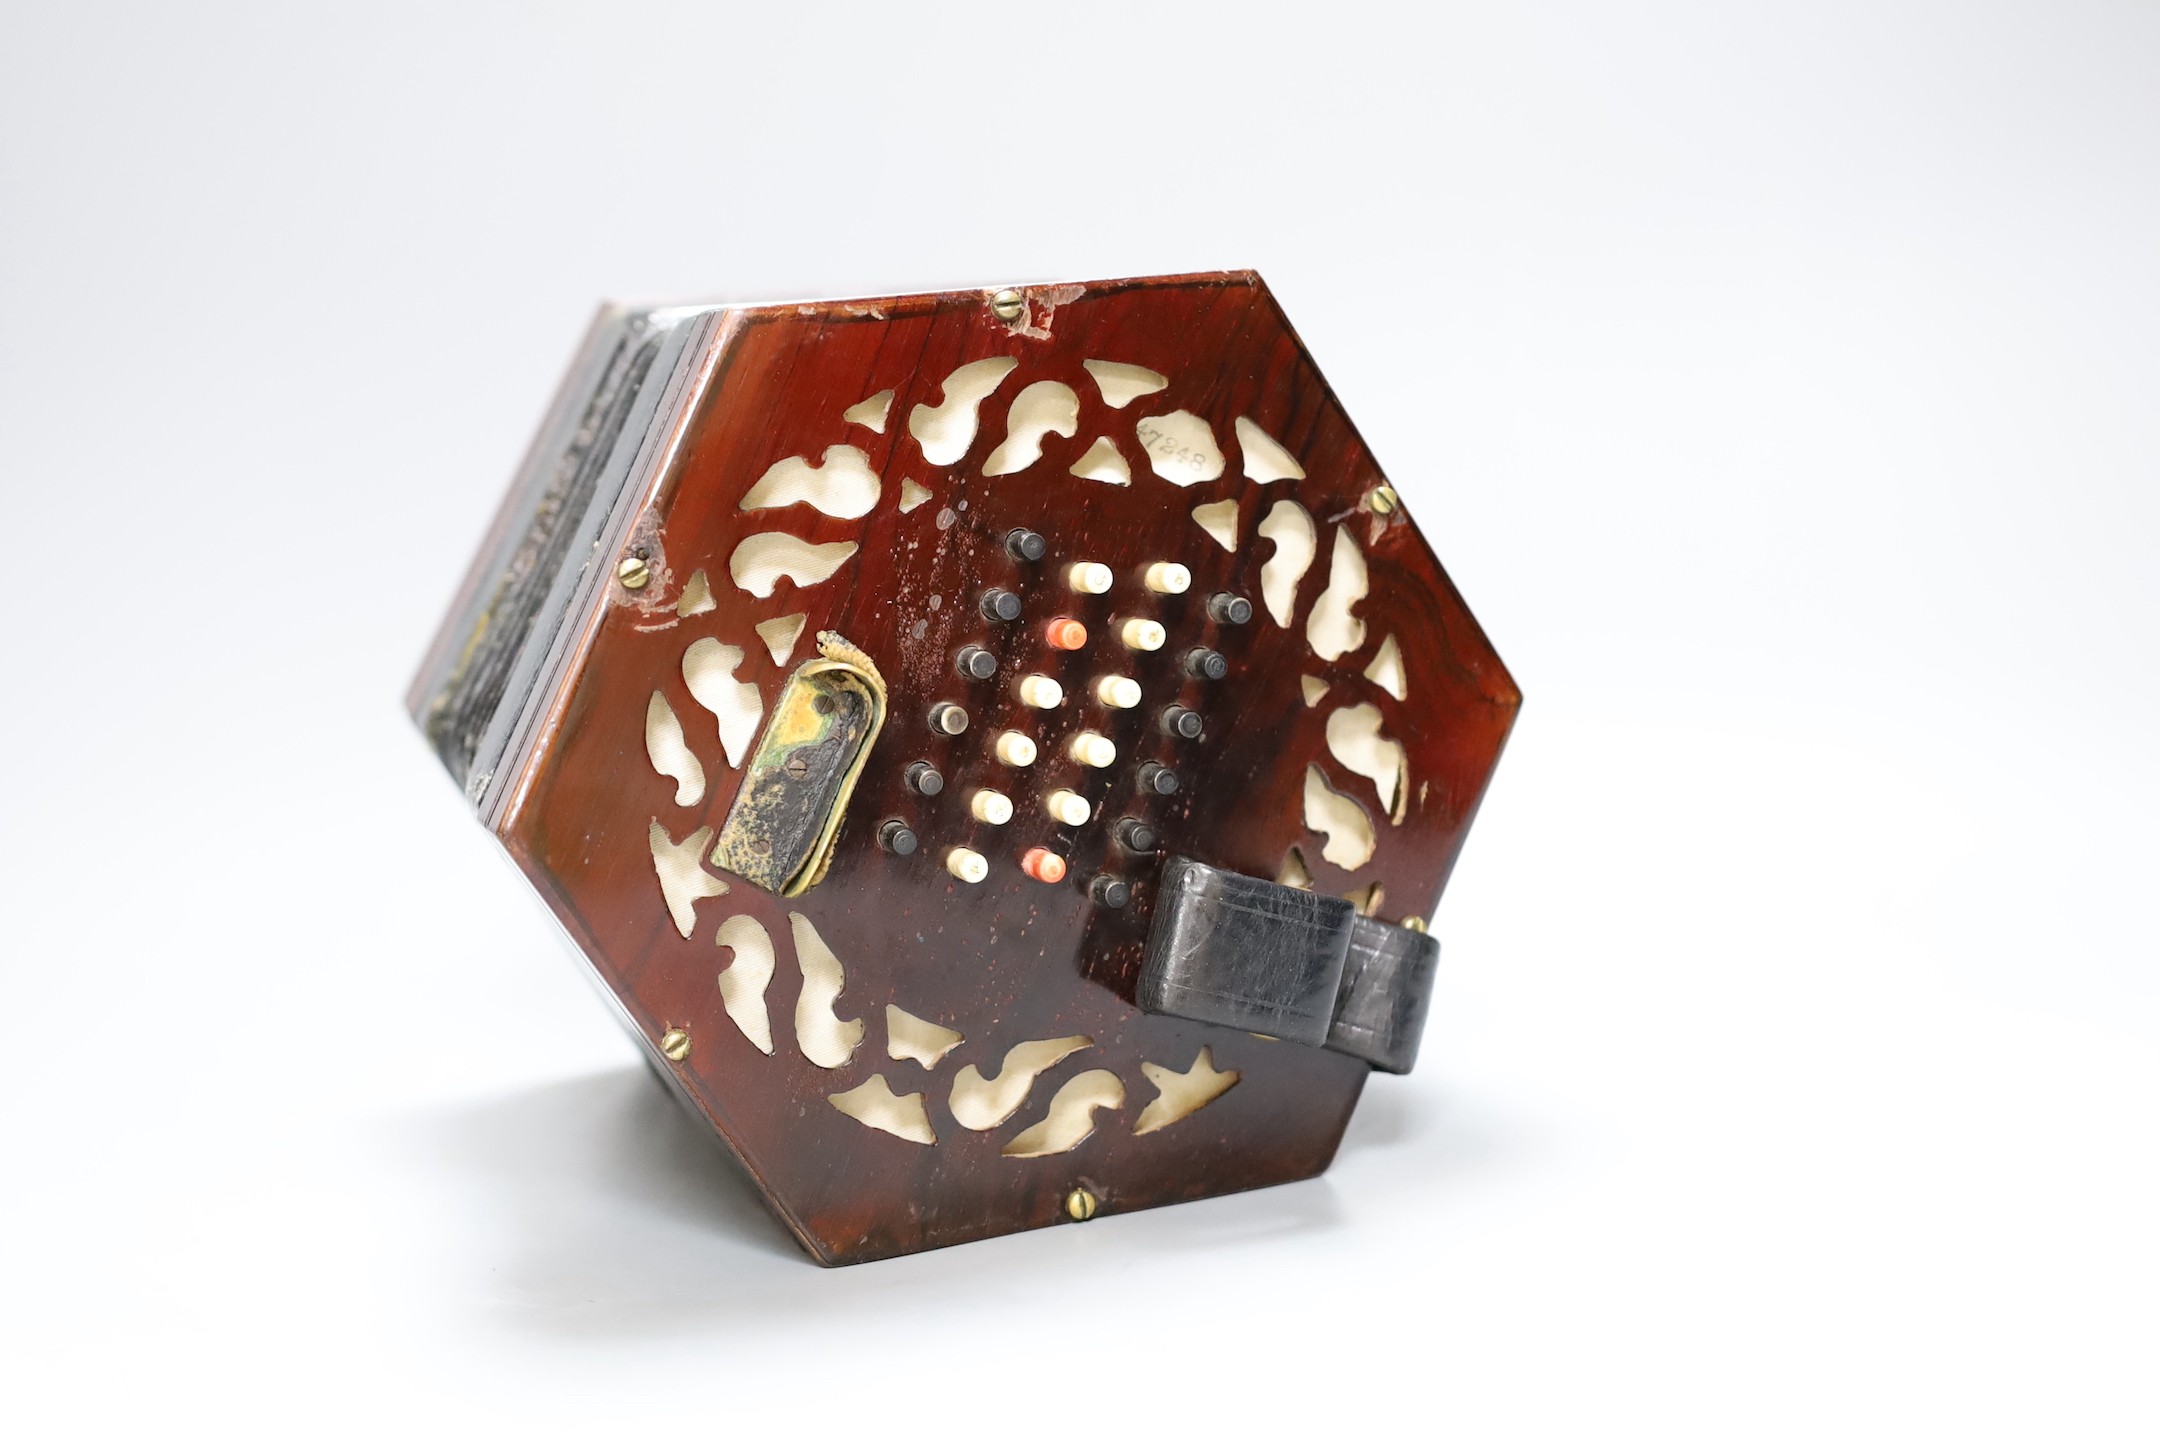 A cased Lachanel & Co rosewood concertina with bone keys, c.1900